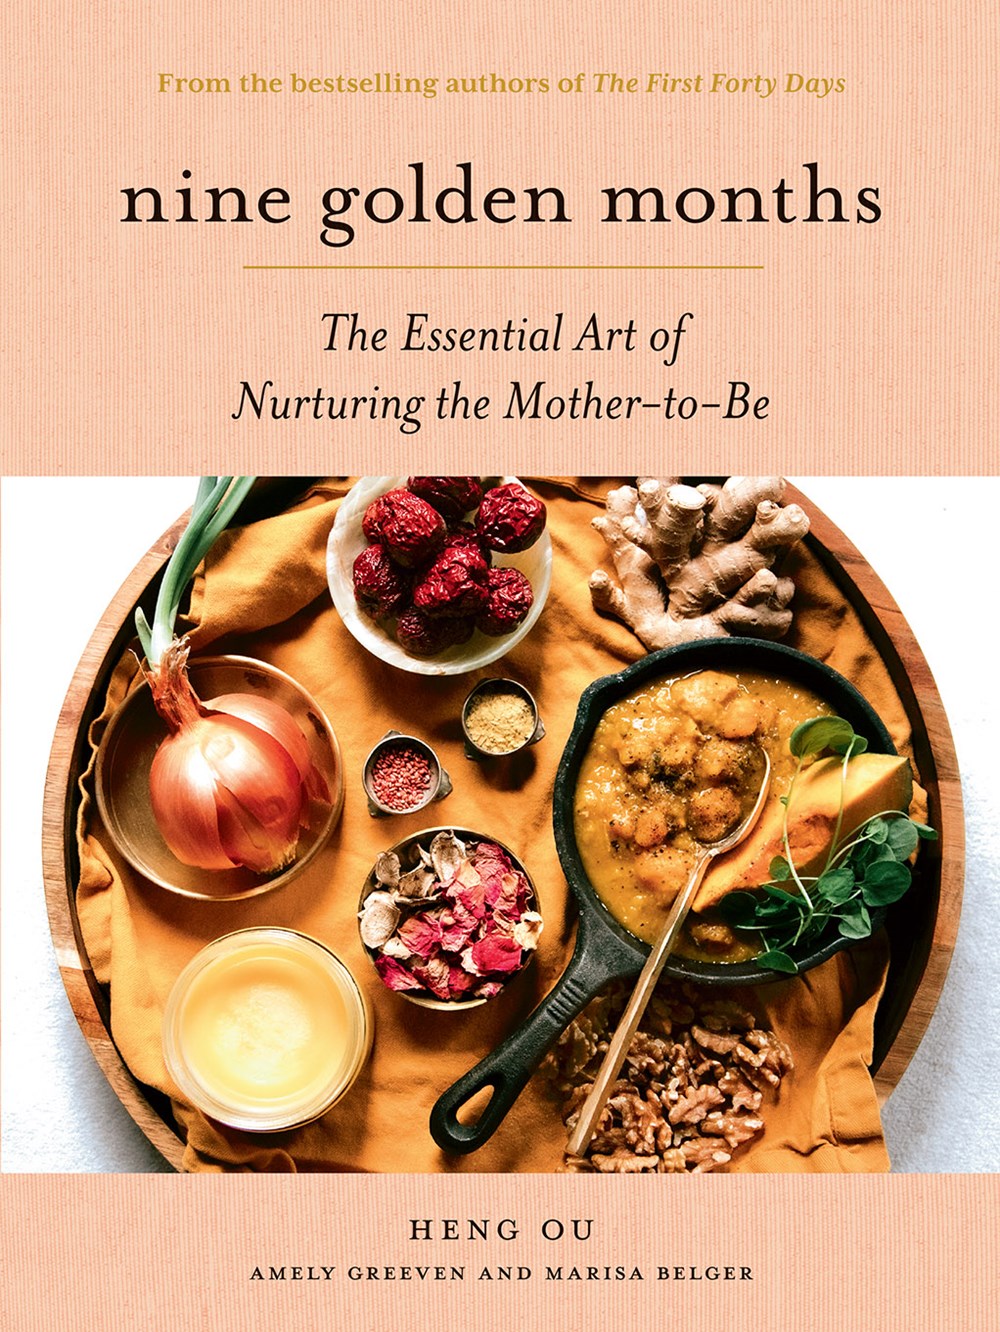 Nine Golden Months: The Essential Art of Nourishing the Mother-to-Be by Heng Ou, Amely Greeven, & Marisa Belger